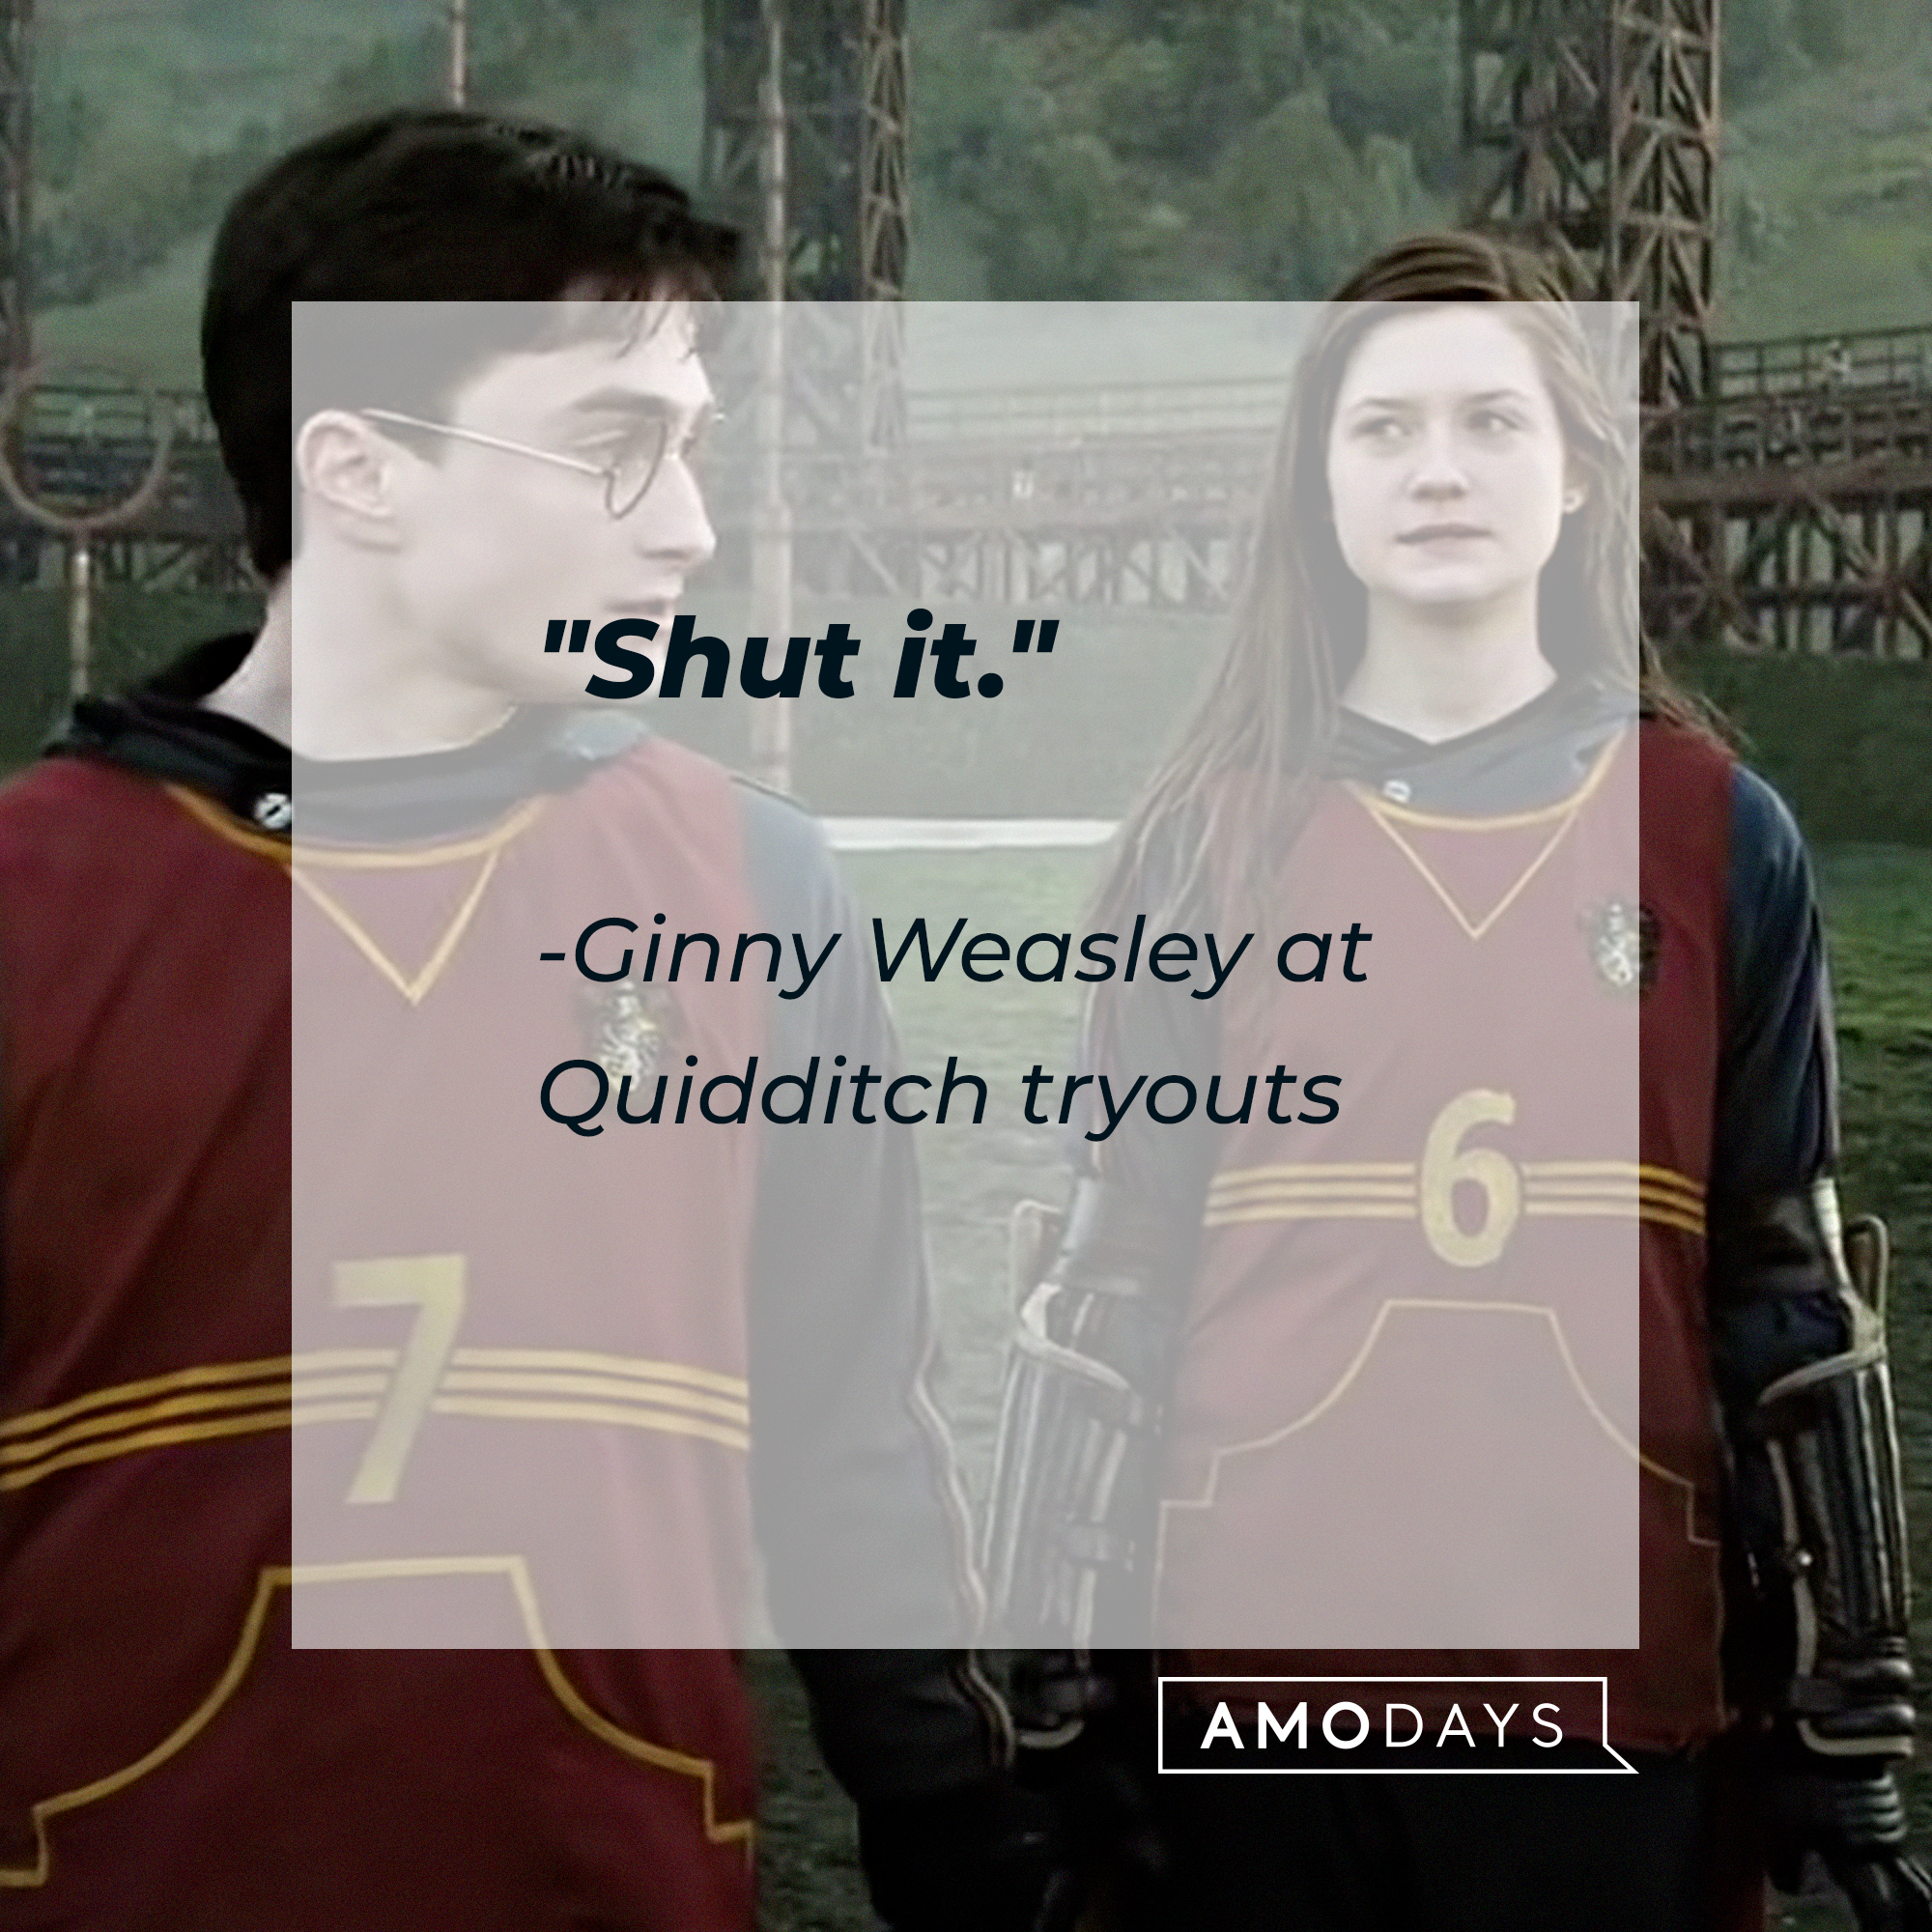 Ginny Weasley’s quote: "Shut it." | Image: Youtube.com/harrypotter